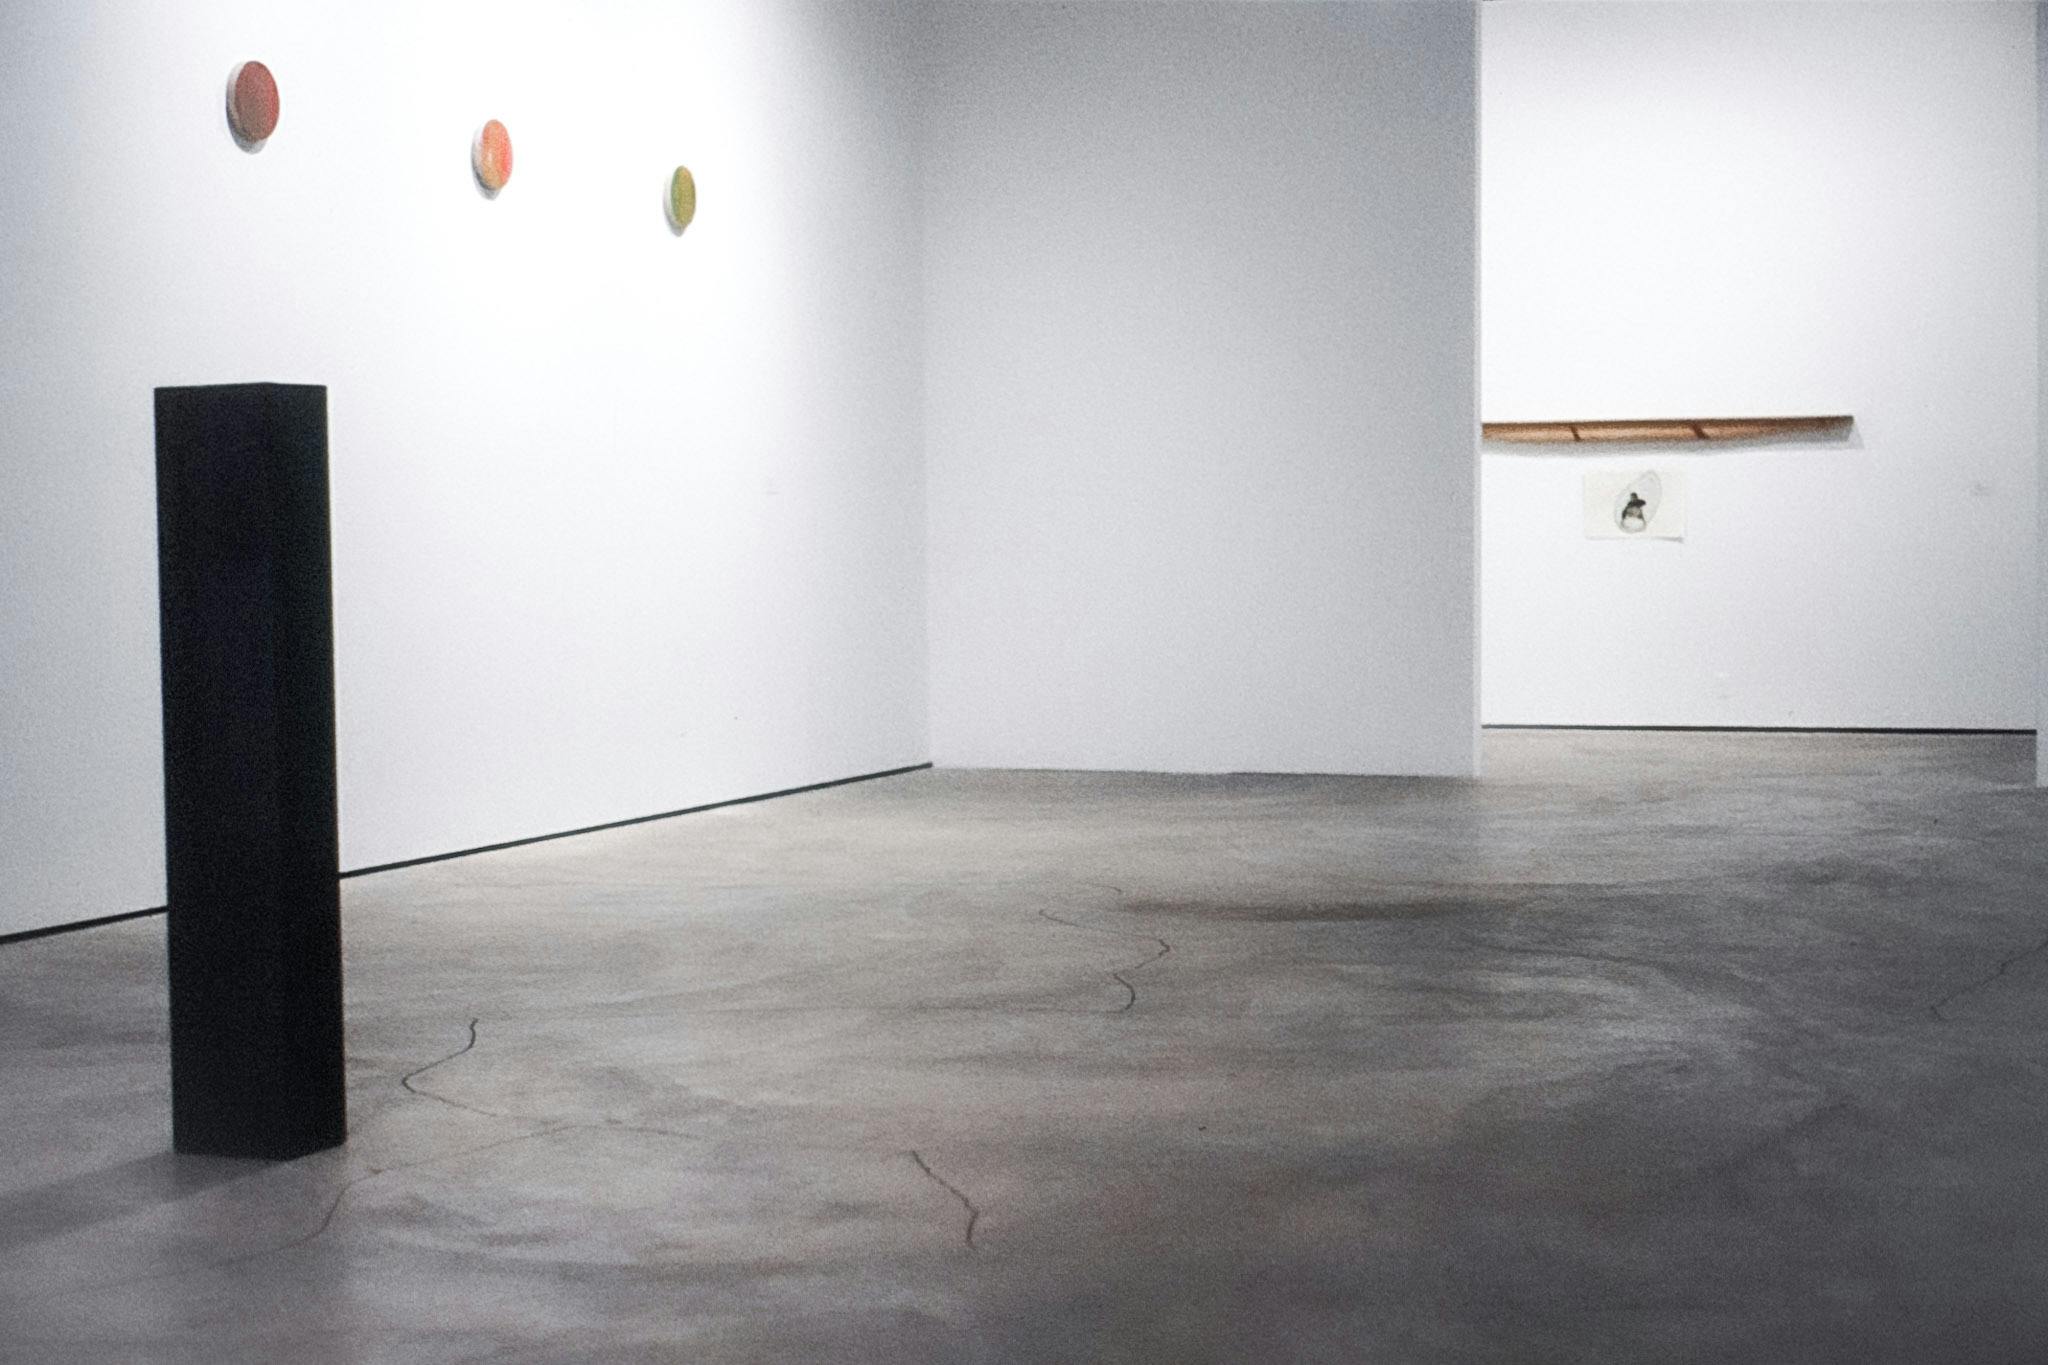 Three small circular artworks hang on a wall to the left, next two them is a tall black plinth and in the background part of another sculptural work is visible through a doorway. 